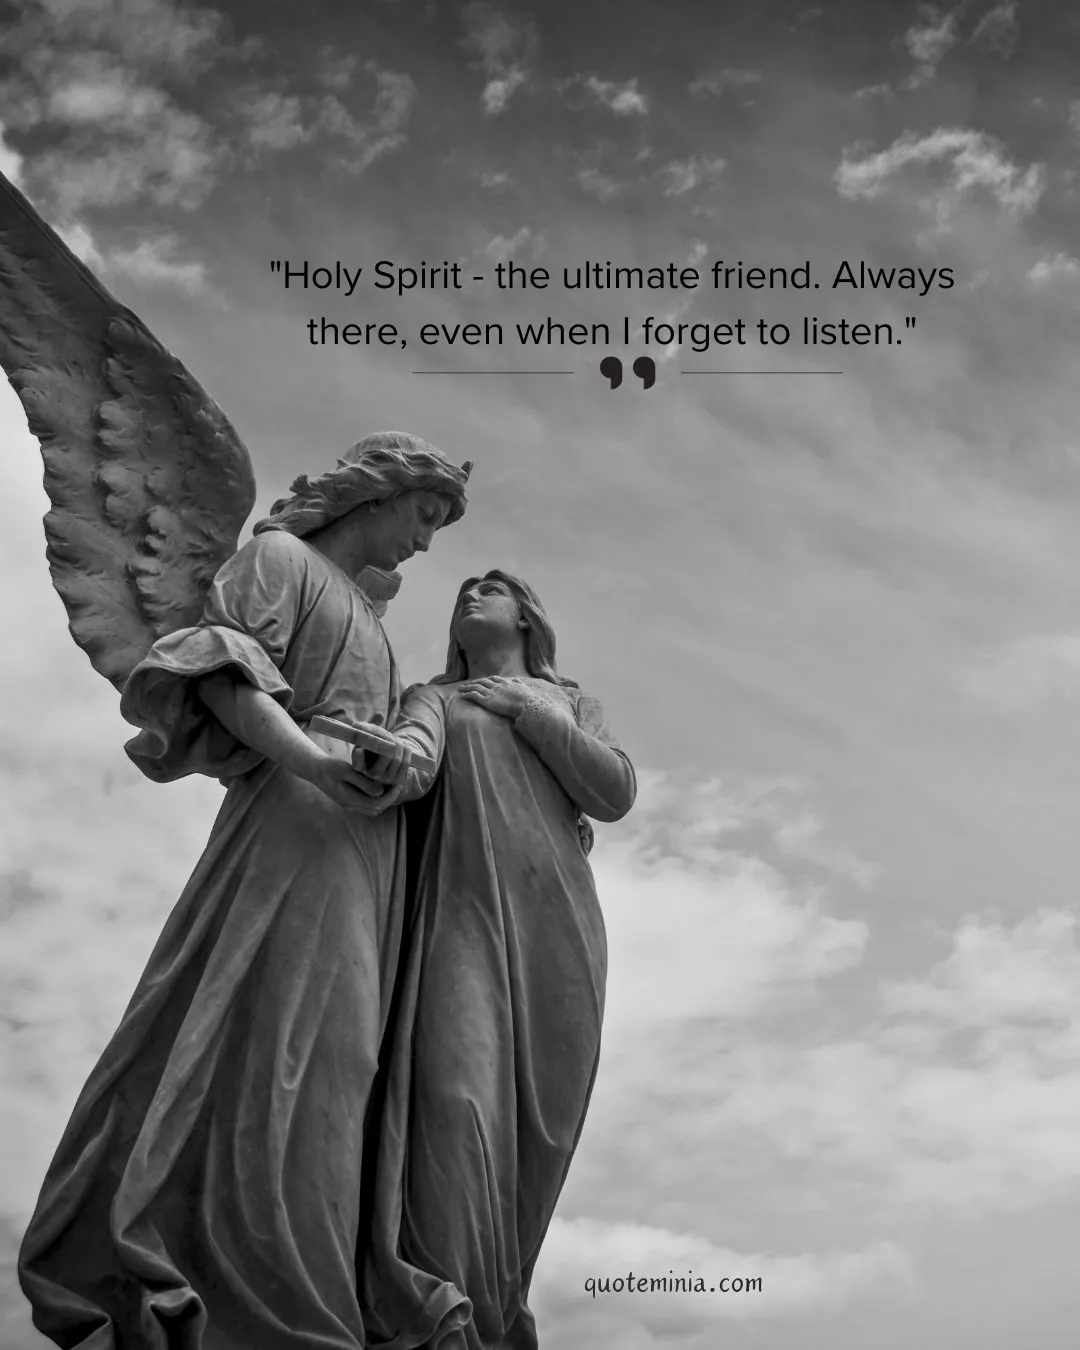 Quotes About The Holy Spirit image